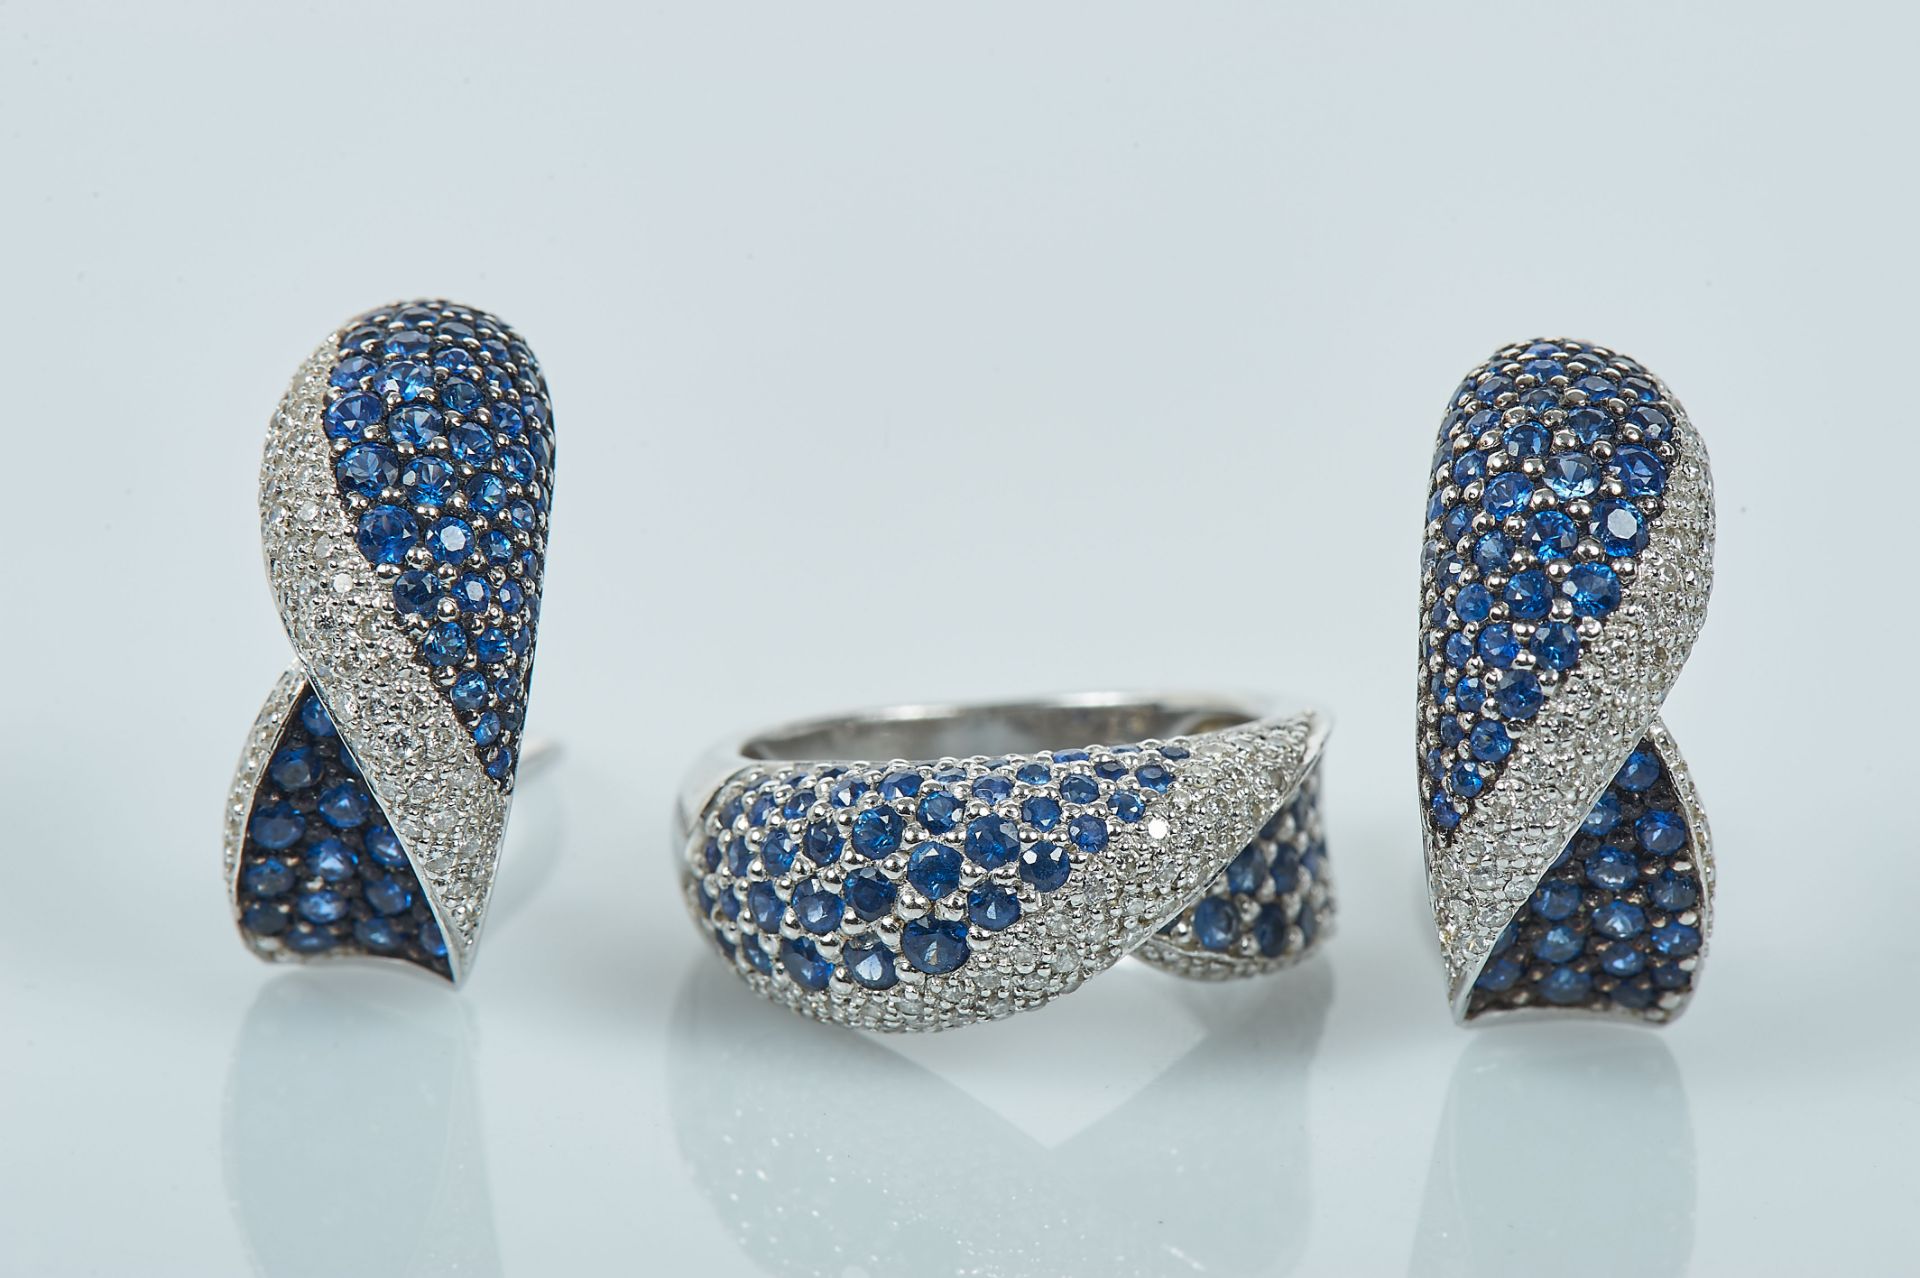 A Ring and a Pair of Earrings, 800/1000 gold, set with 144 sapphires and 174 brilliant cut